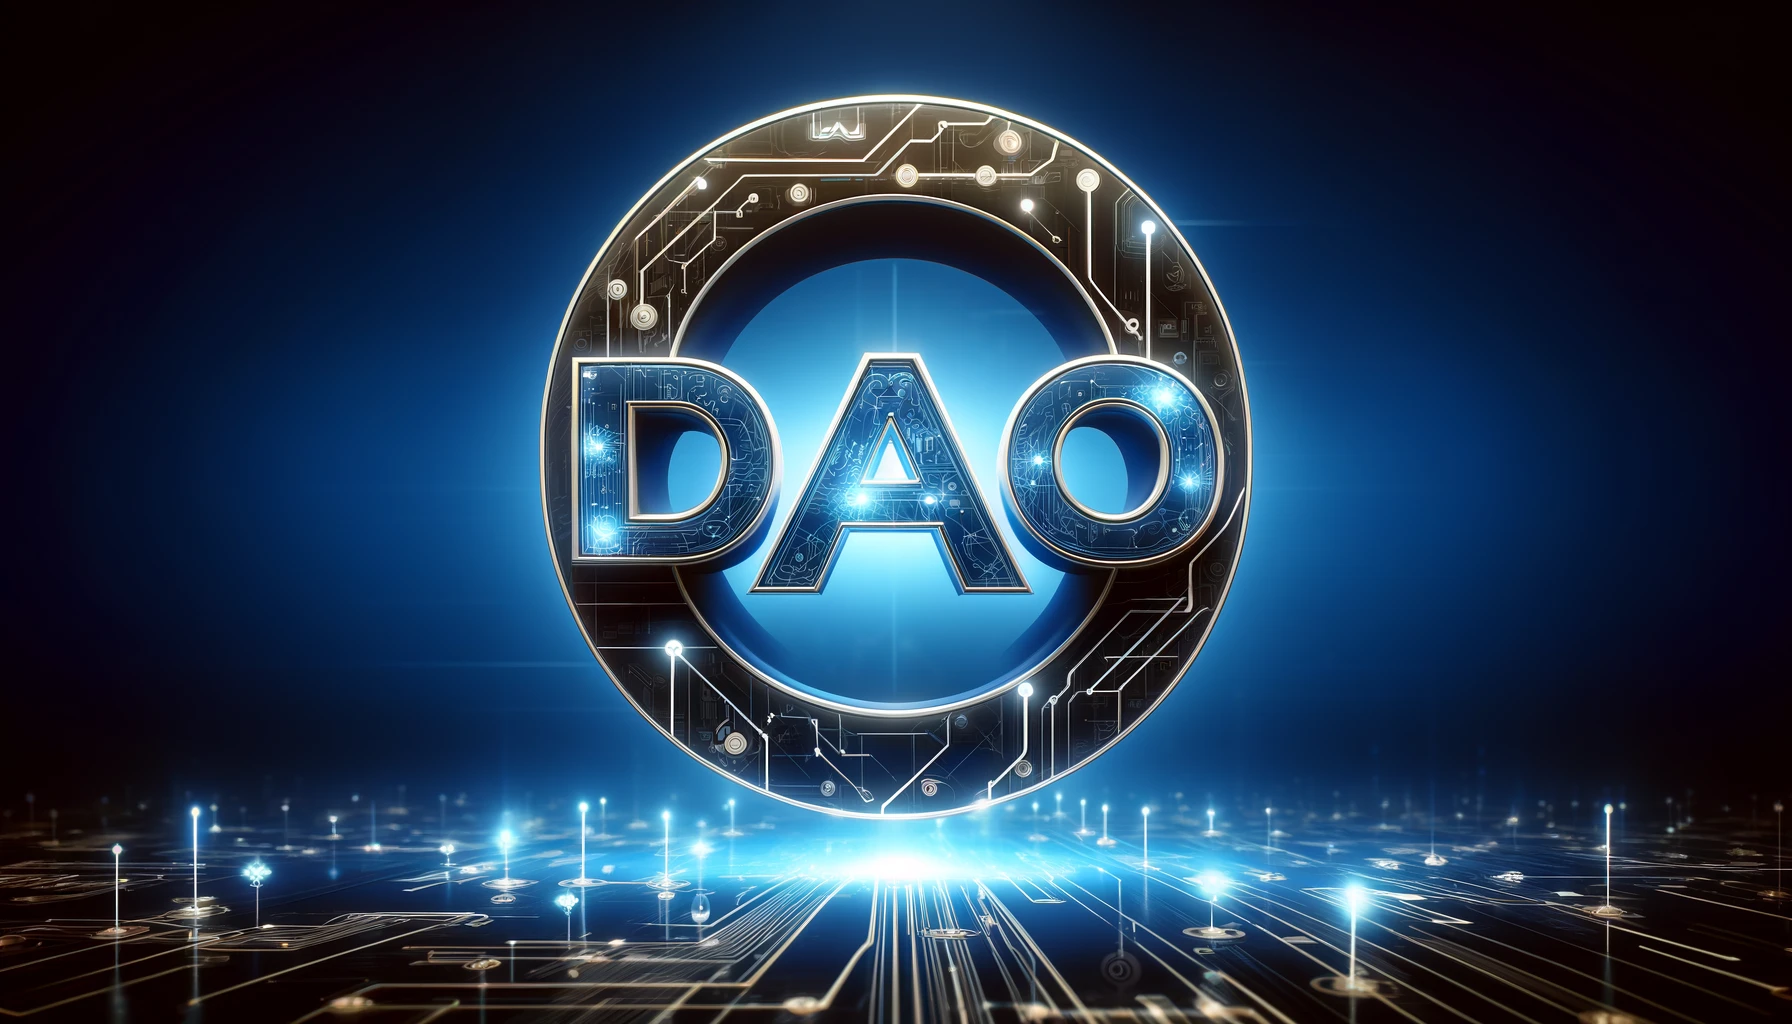 DALL·E 2024-04-04 15.18.16 - Create an image depicting the acronym 'DAO' standing for Decentralized Autonomous Organization. The letters should be designed with a sleek, futuristi